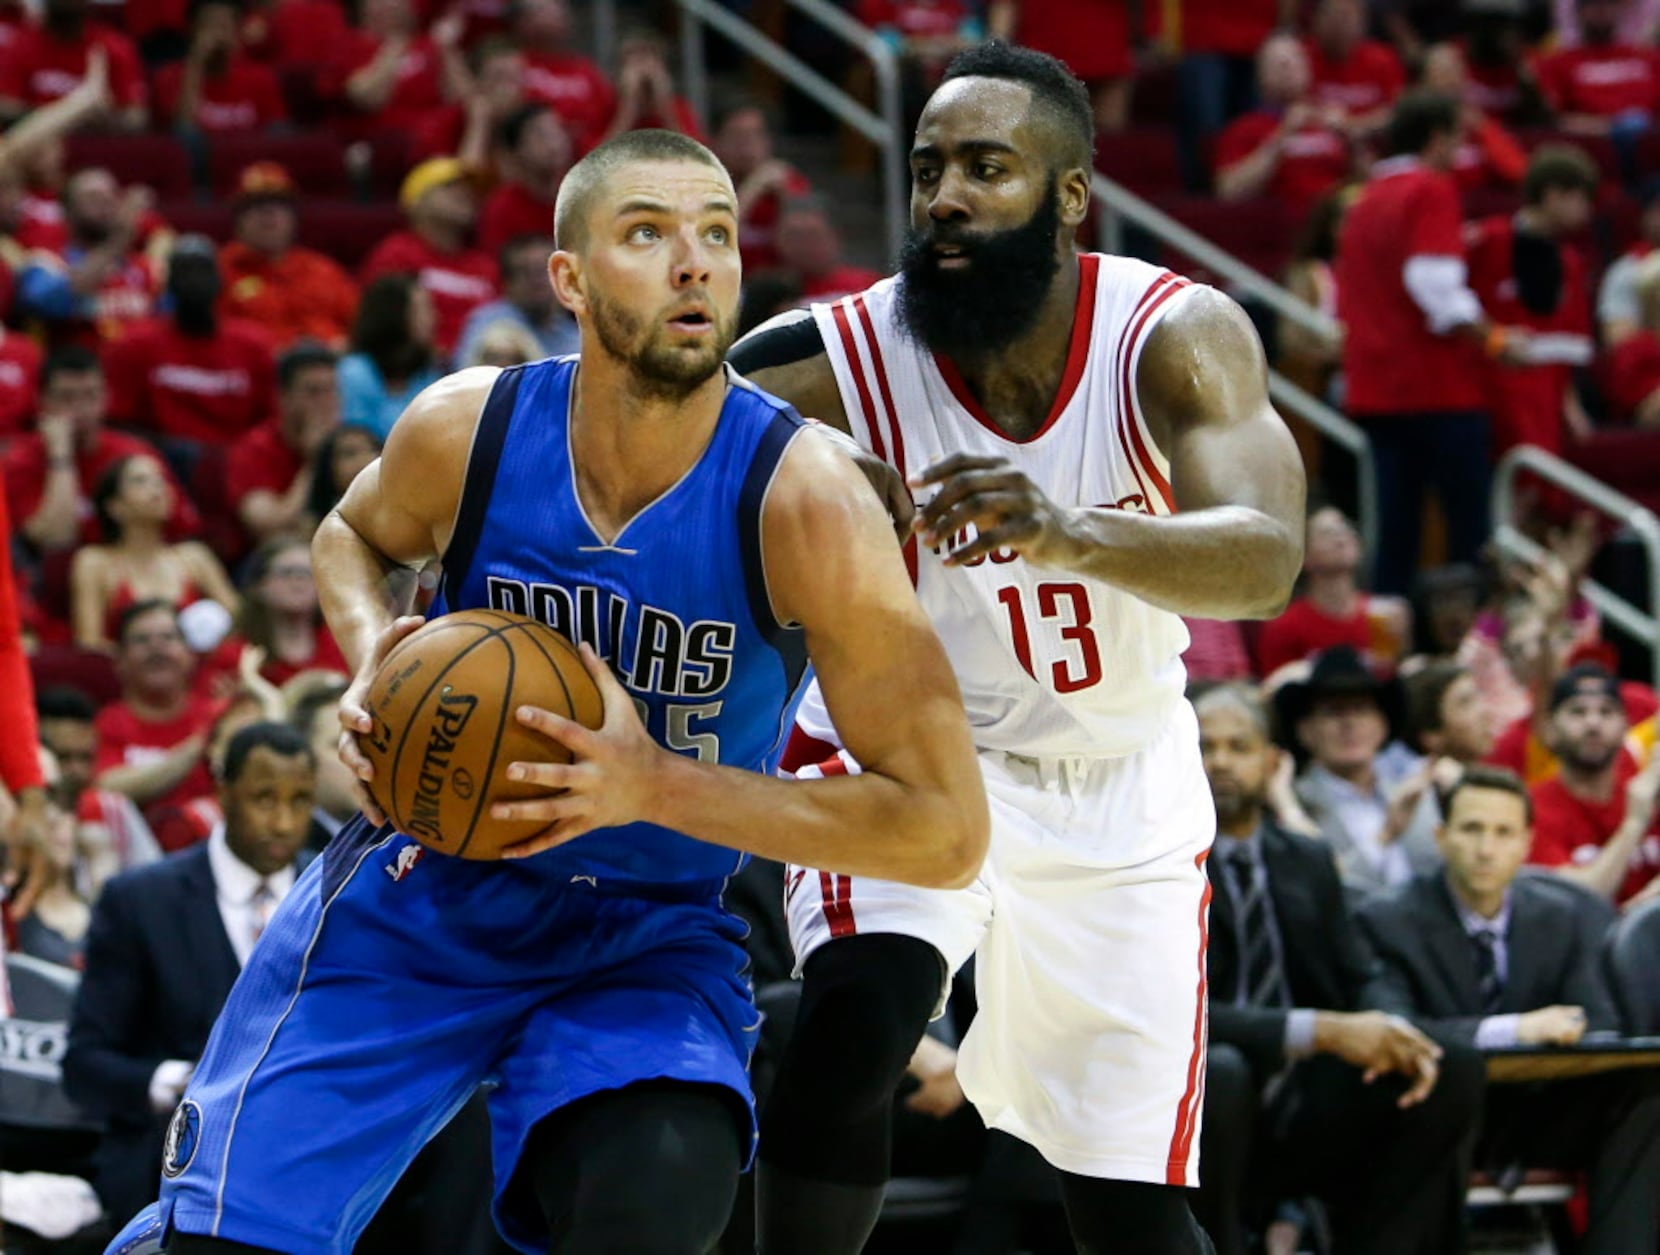 Mavs' Chandler Parsons to miss next three games with ankle injury